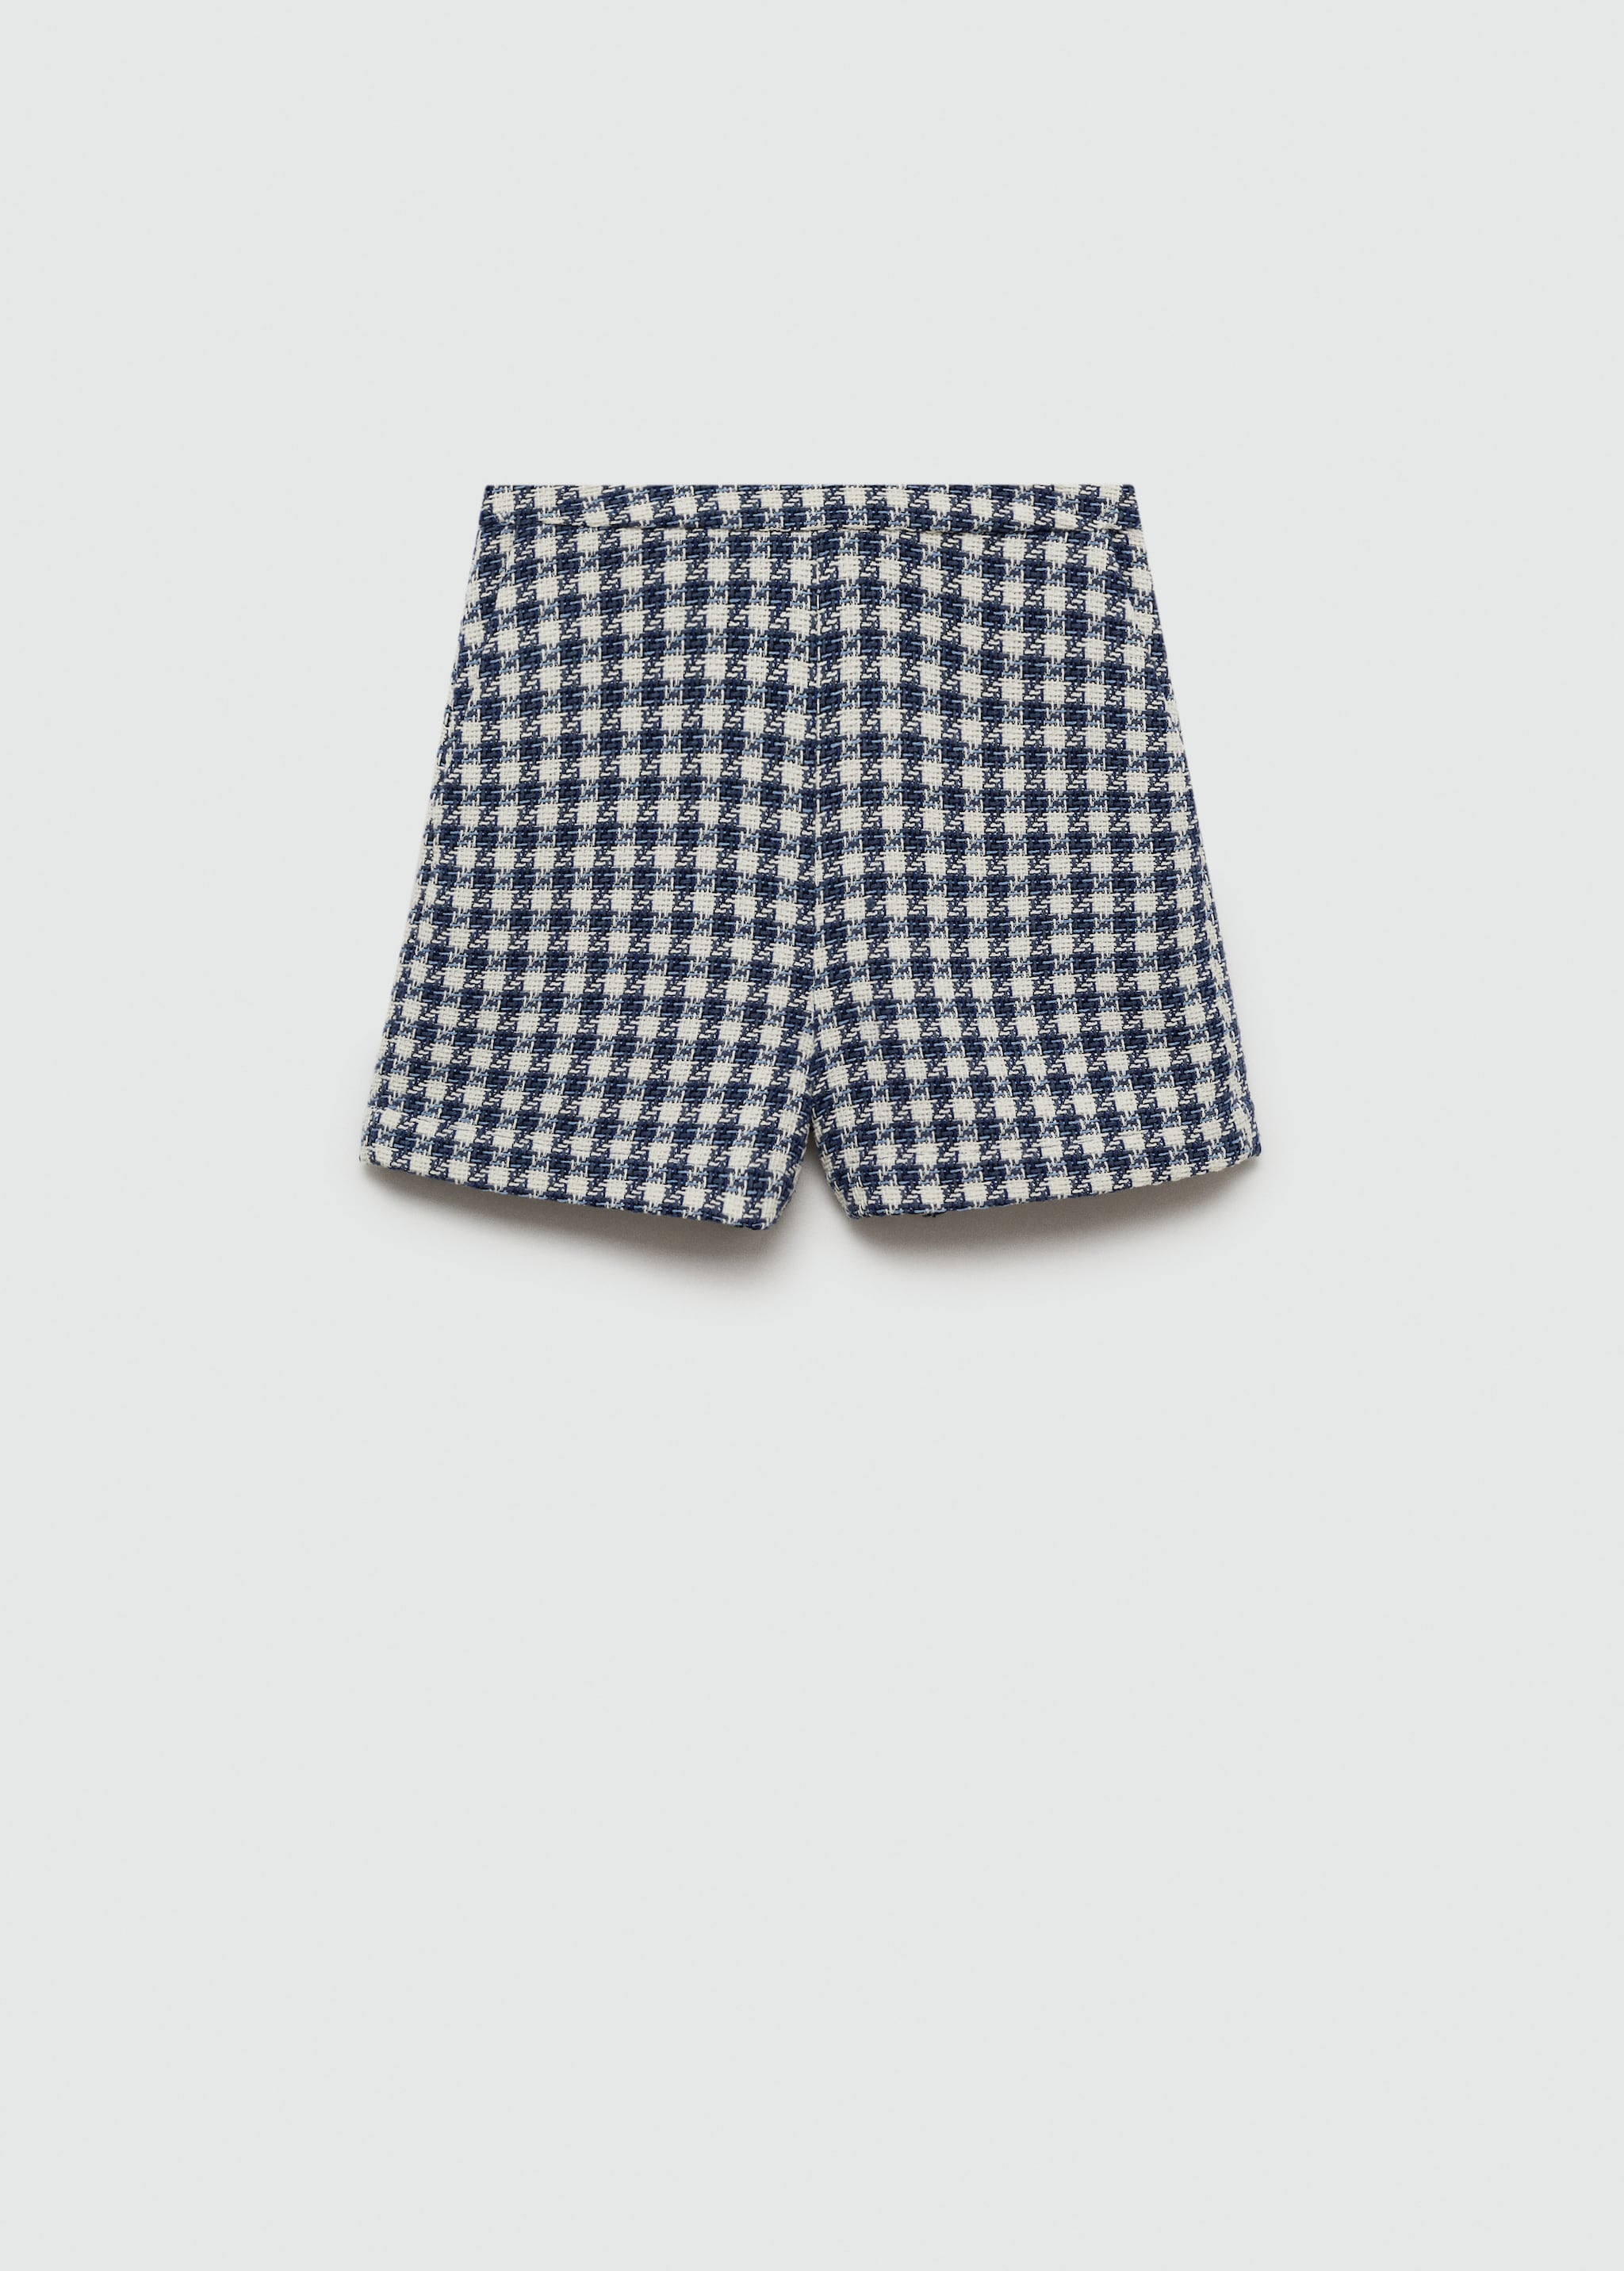 Houndstooth shorts - Article without model